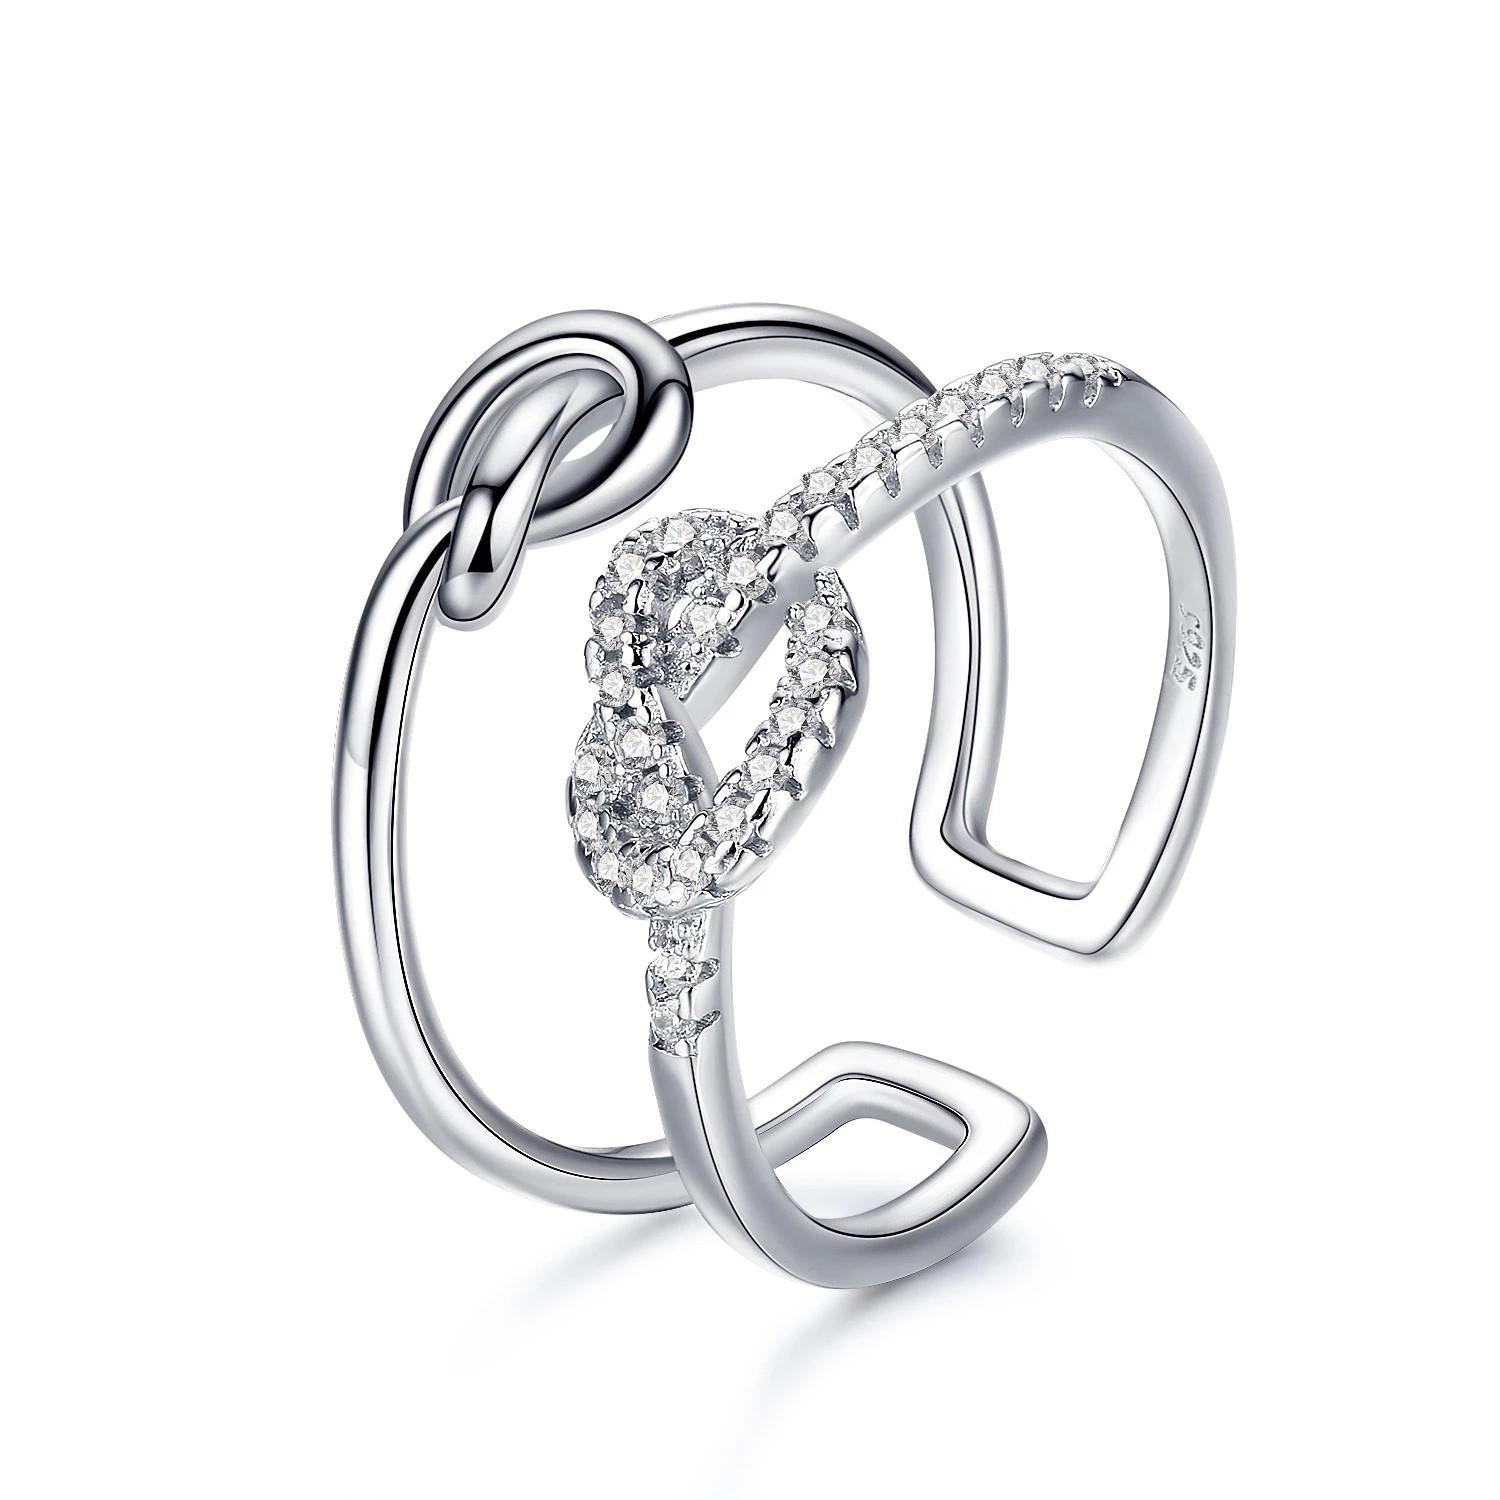 Women's Sterling Silver Knotted Heart Open Ring With Zirconia